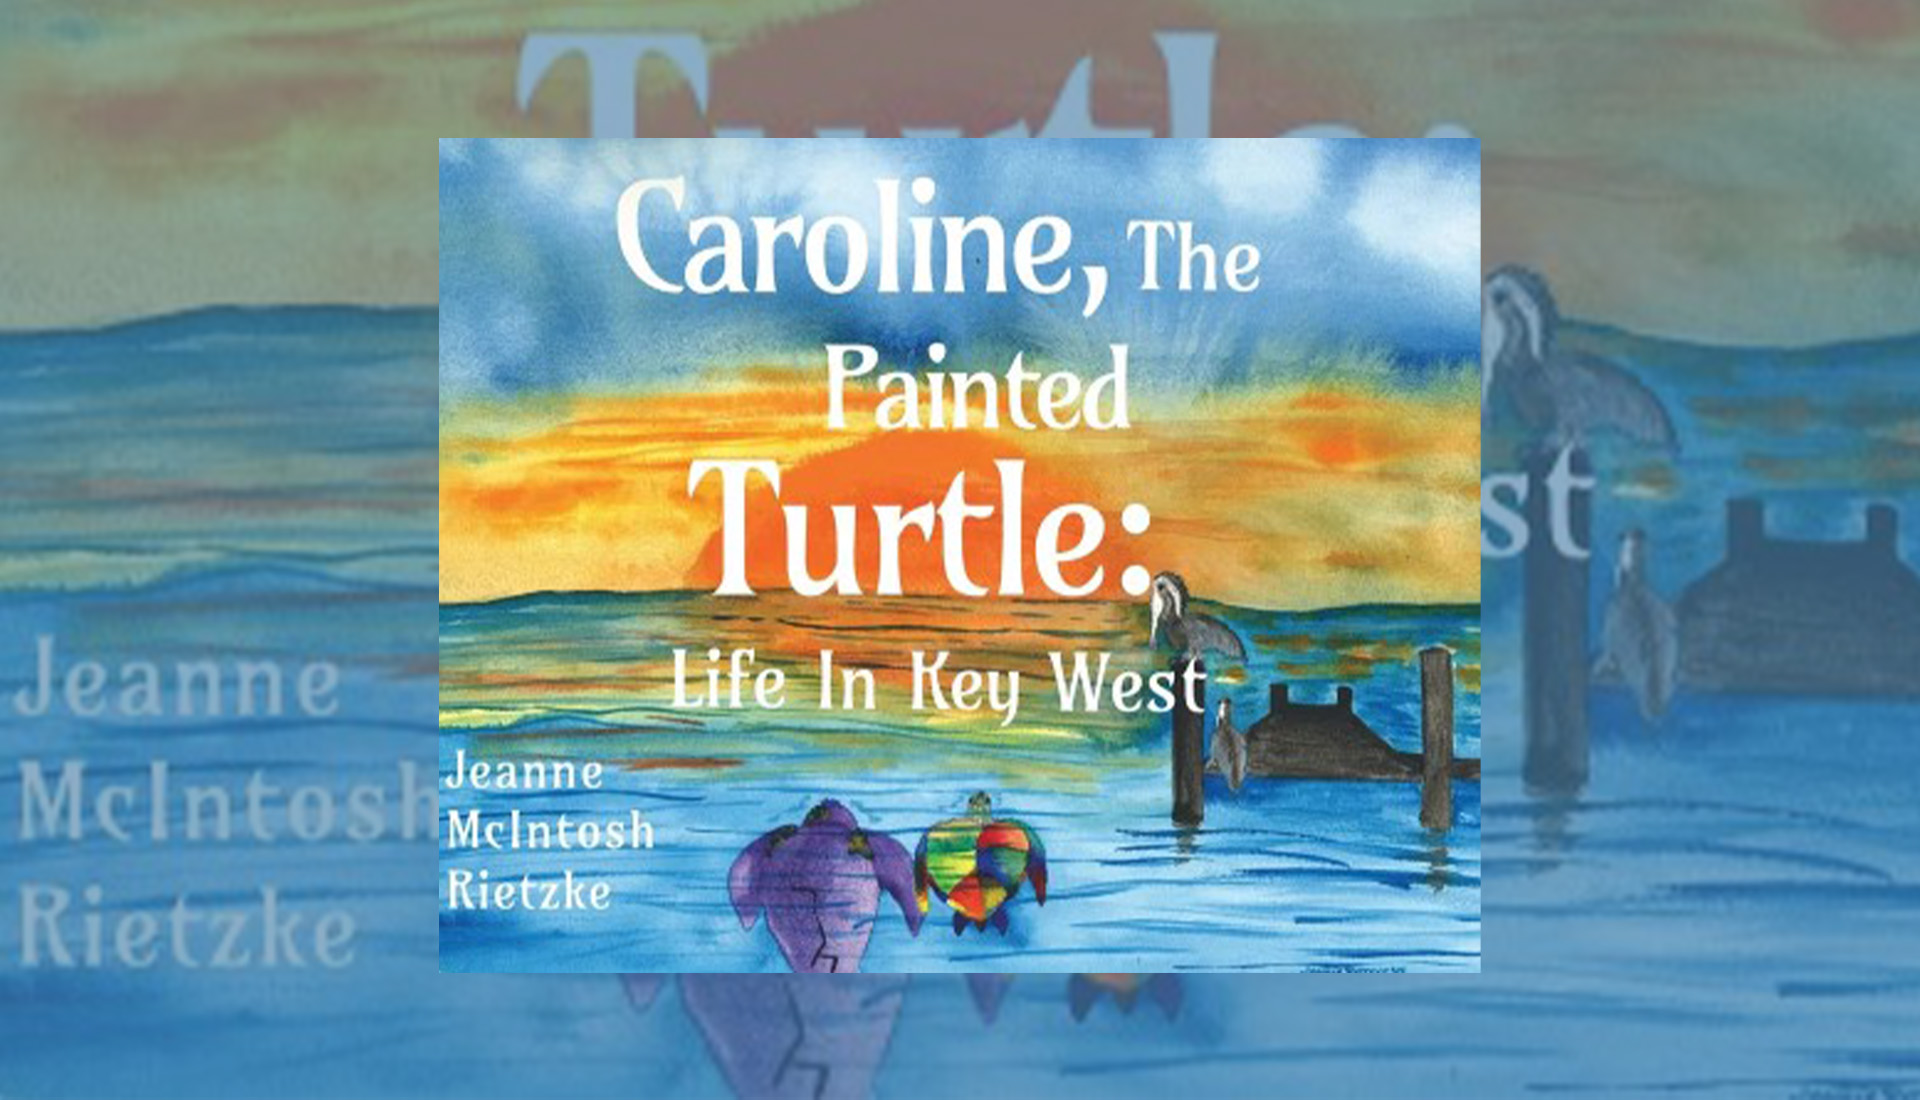 Caroline the Painted Turtle Life in Key West